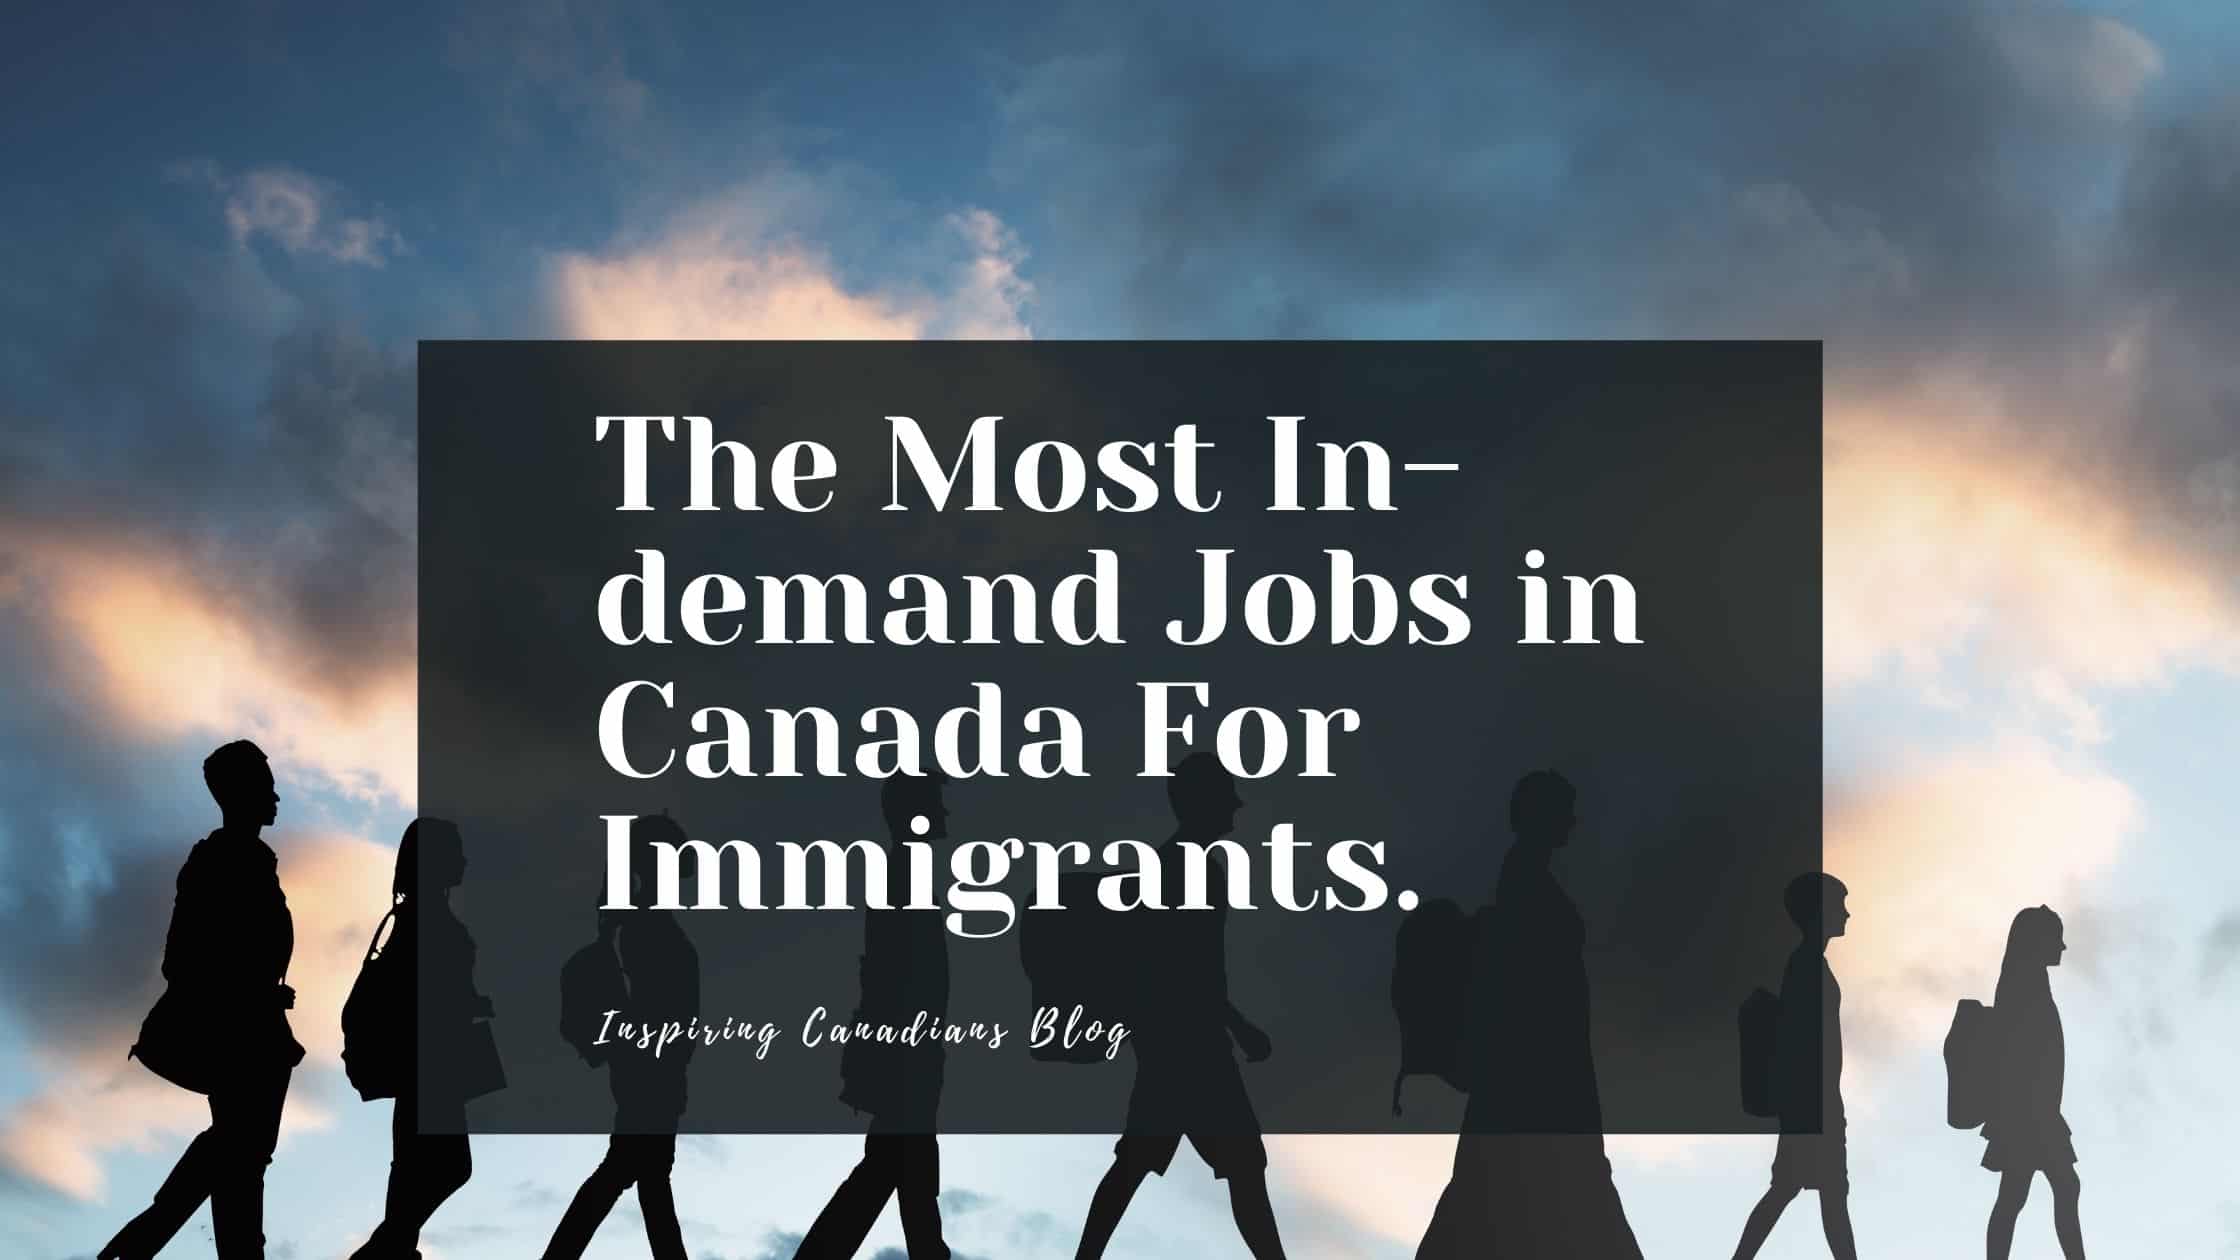 The Most In-demand Jobs in Canada For Immigrants.